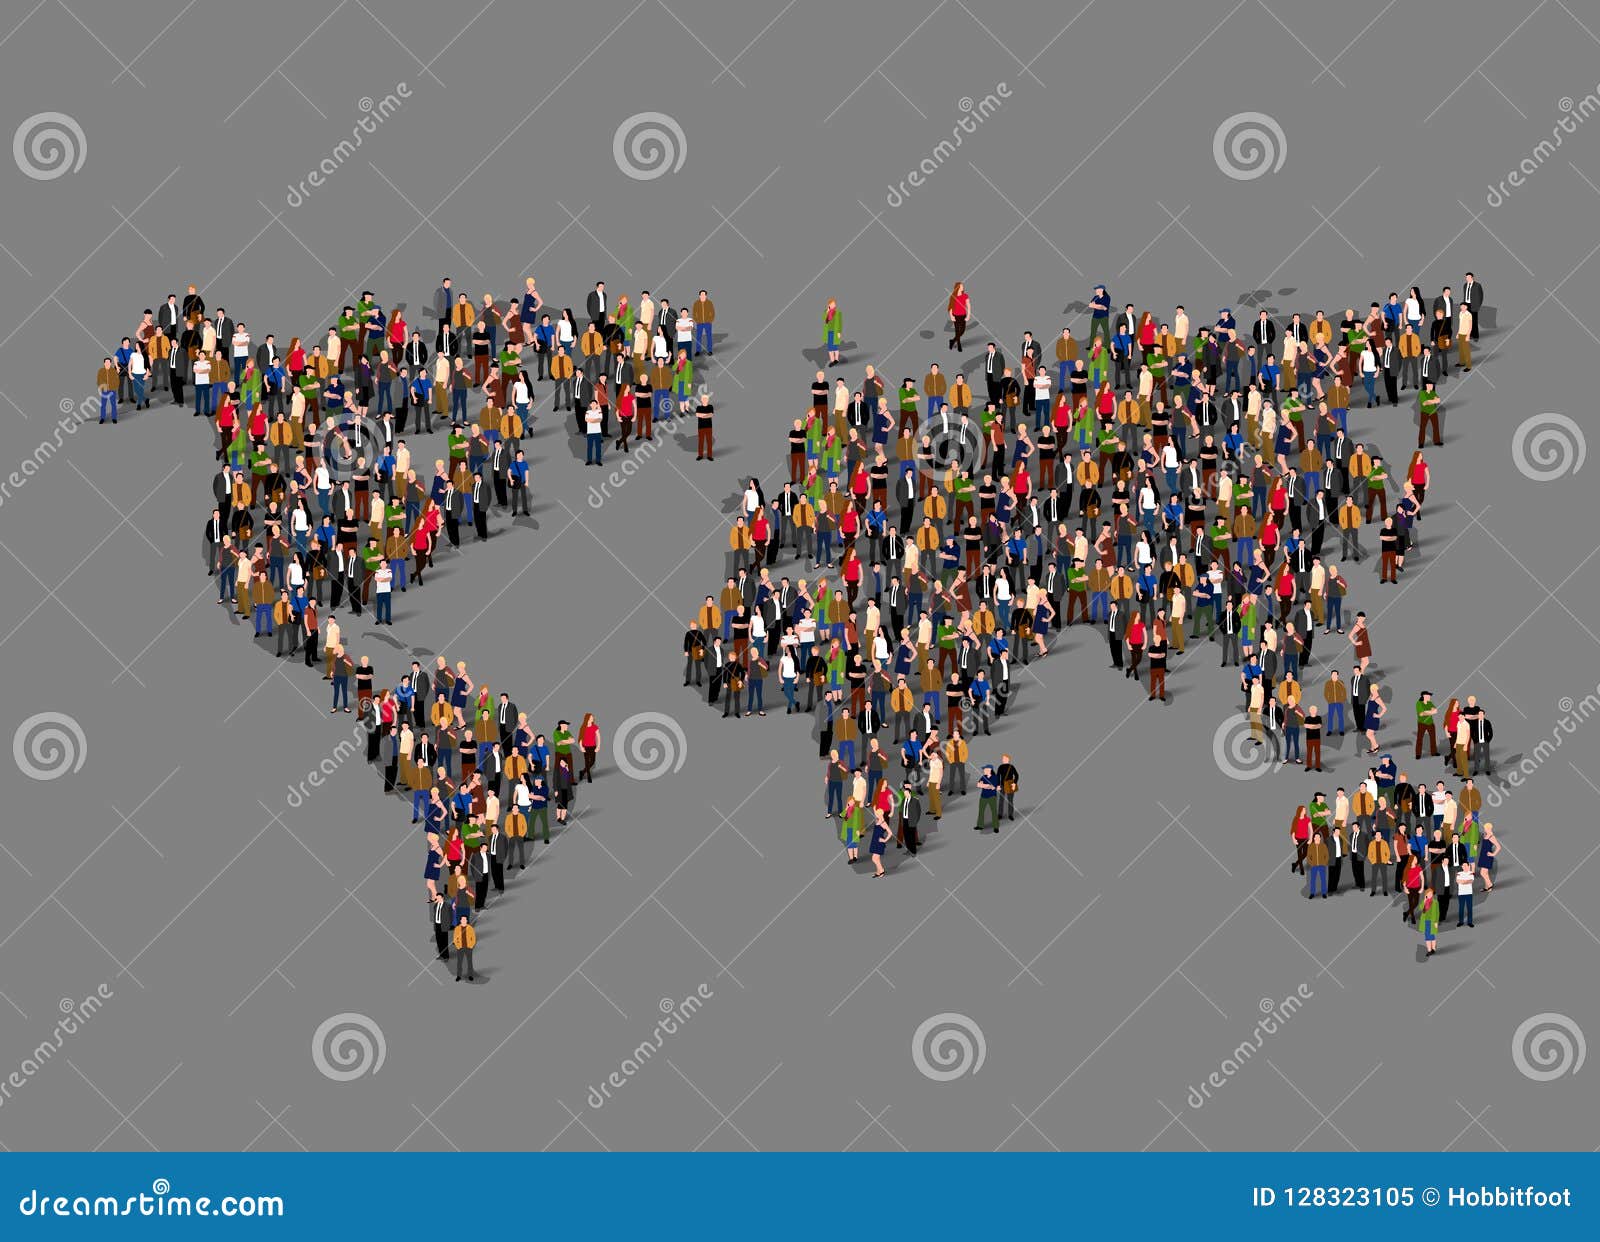 group of people in form of world map. globalization, population, social concept.